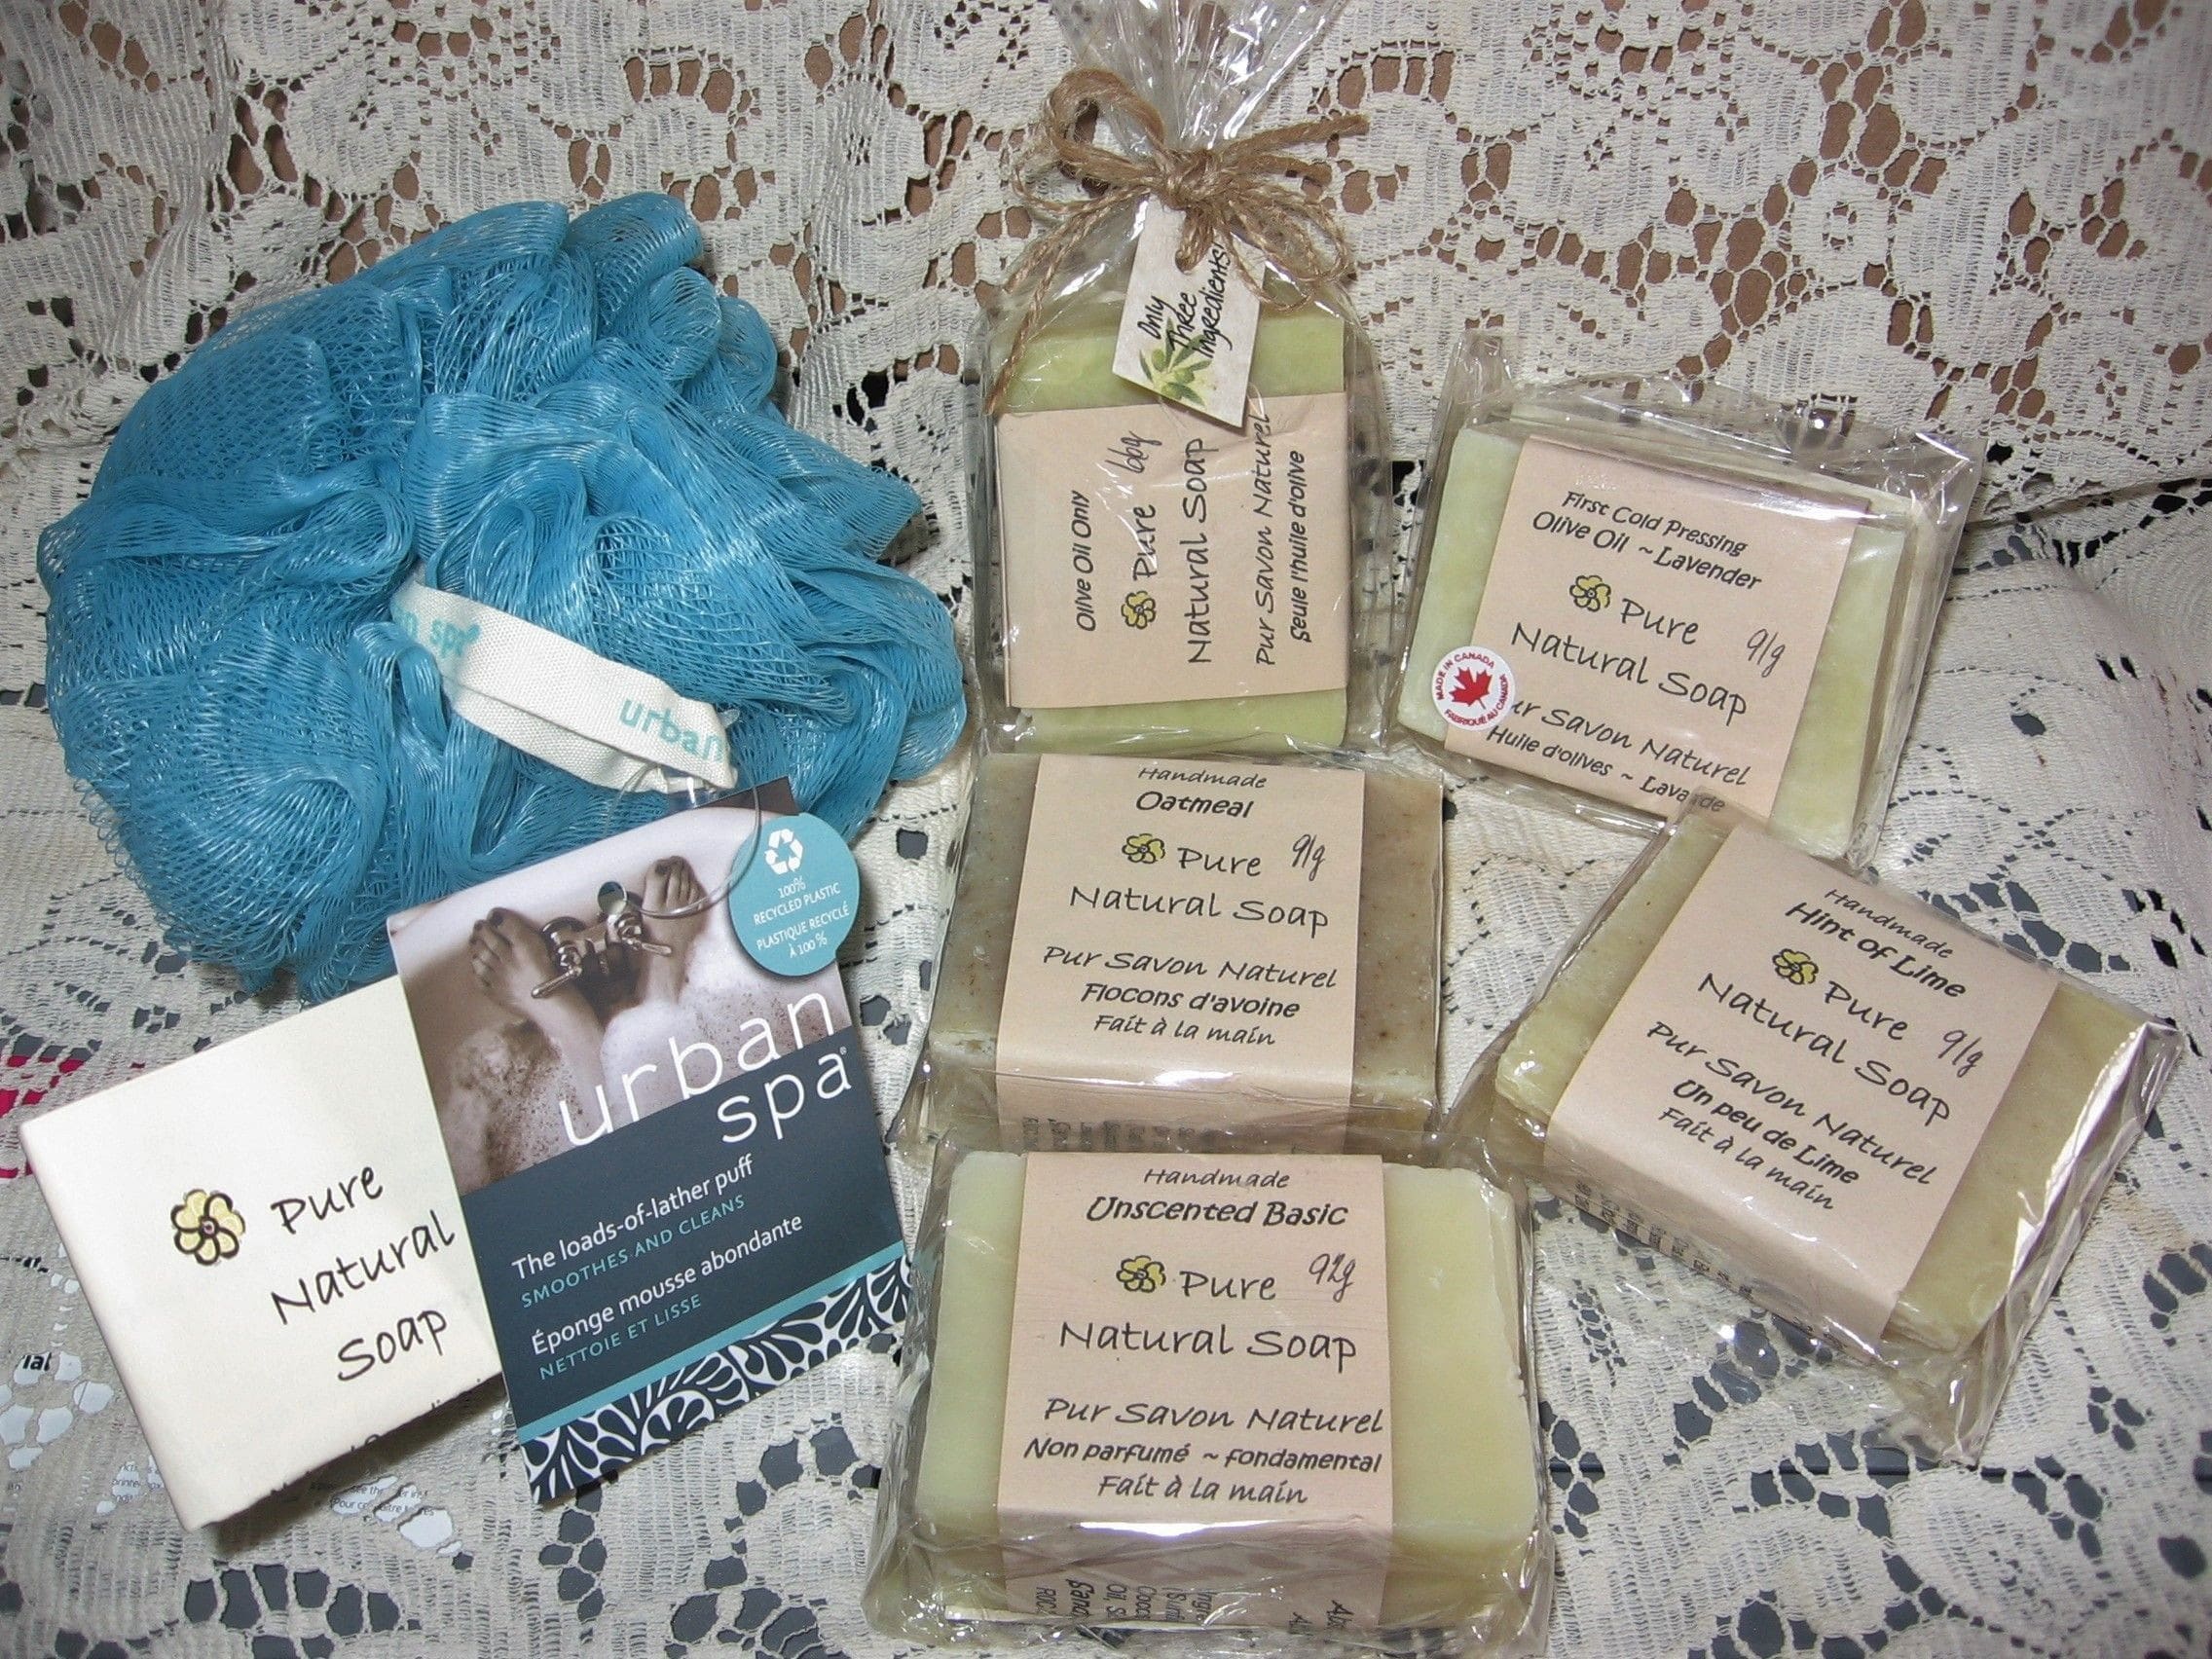 Our pure natural soap gift sets make a lovely reasonably priced family or couple gift for any occasion.  Made with wholesome ingredients and 100% natural, vegan